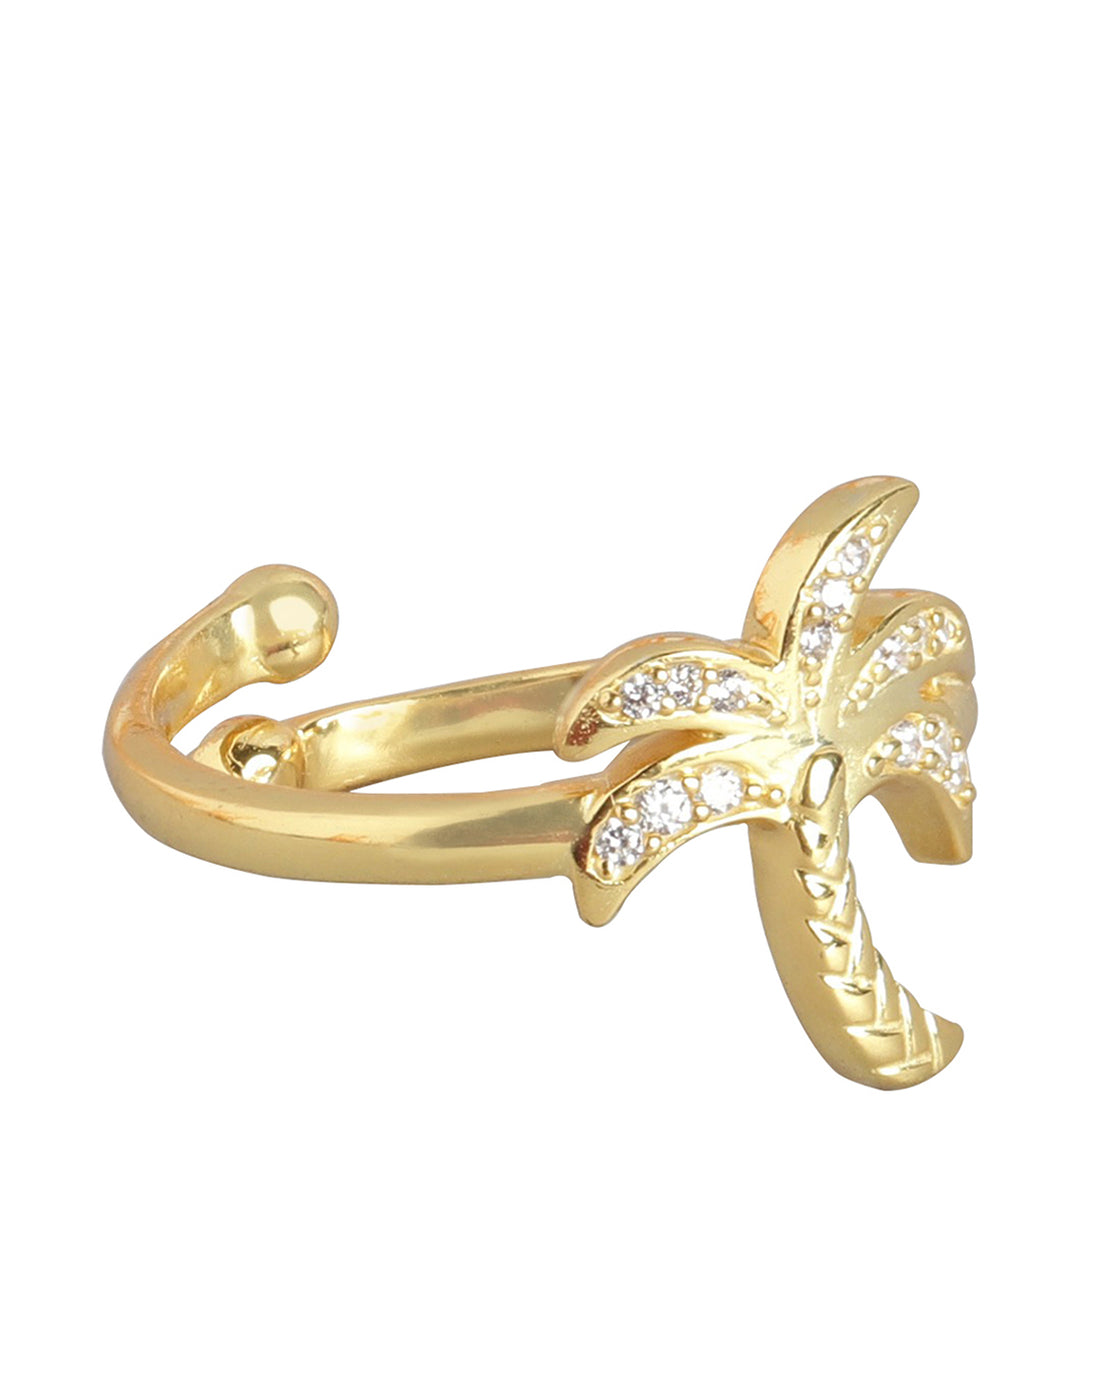 Carlton London Gold Plated Cz Studded Tree Contemporary Adjustable Finger Ring For Women